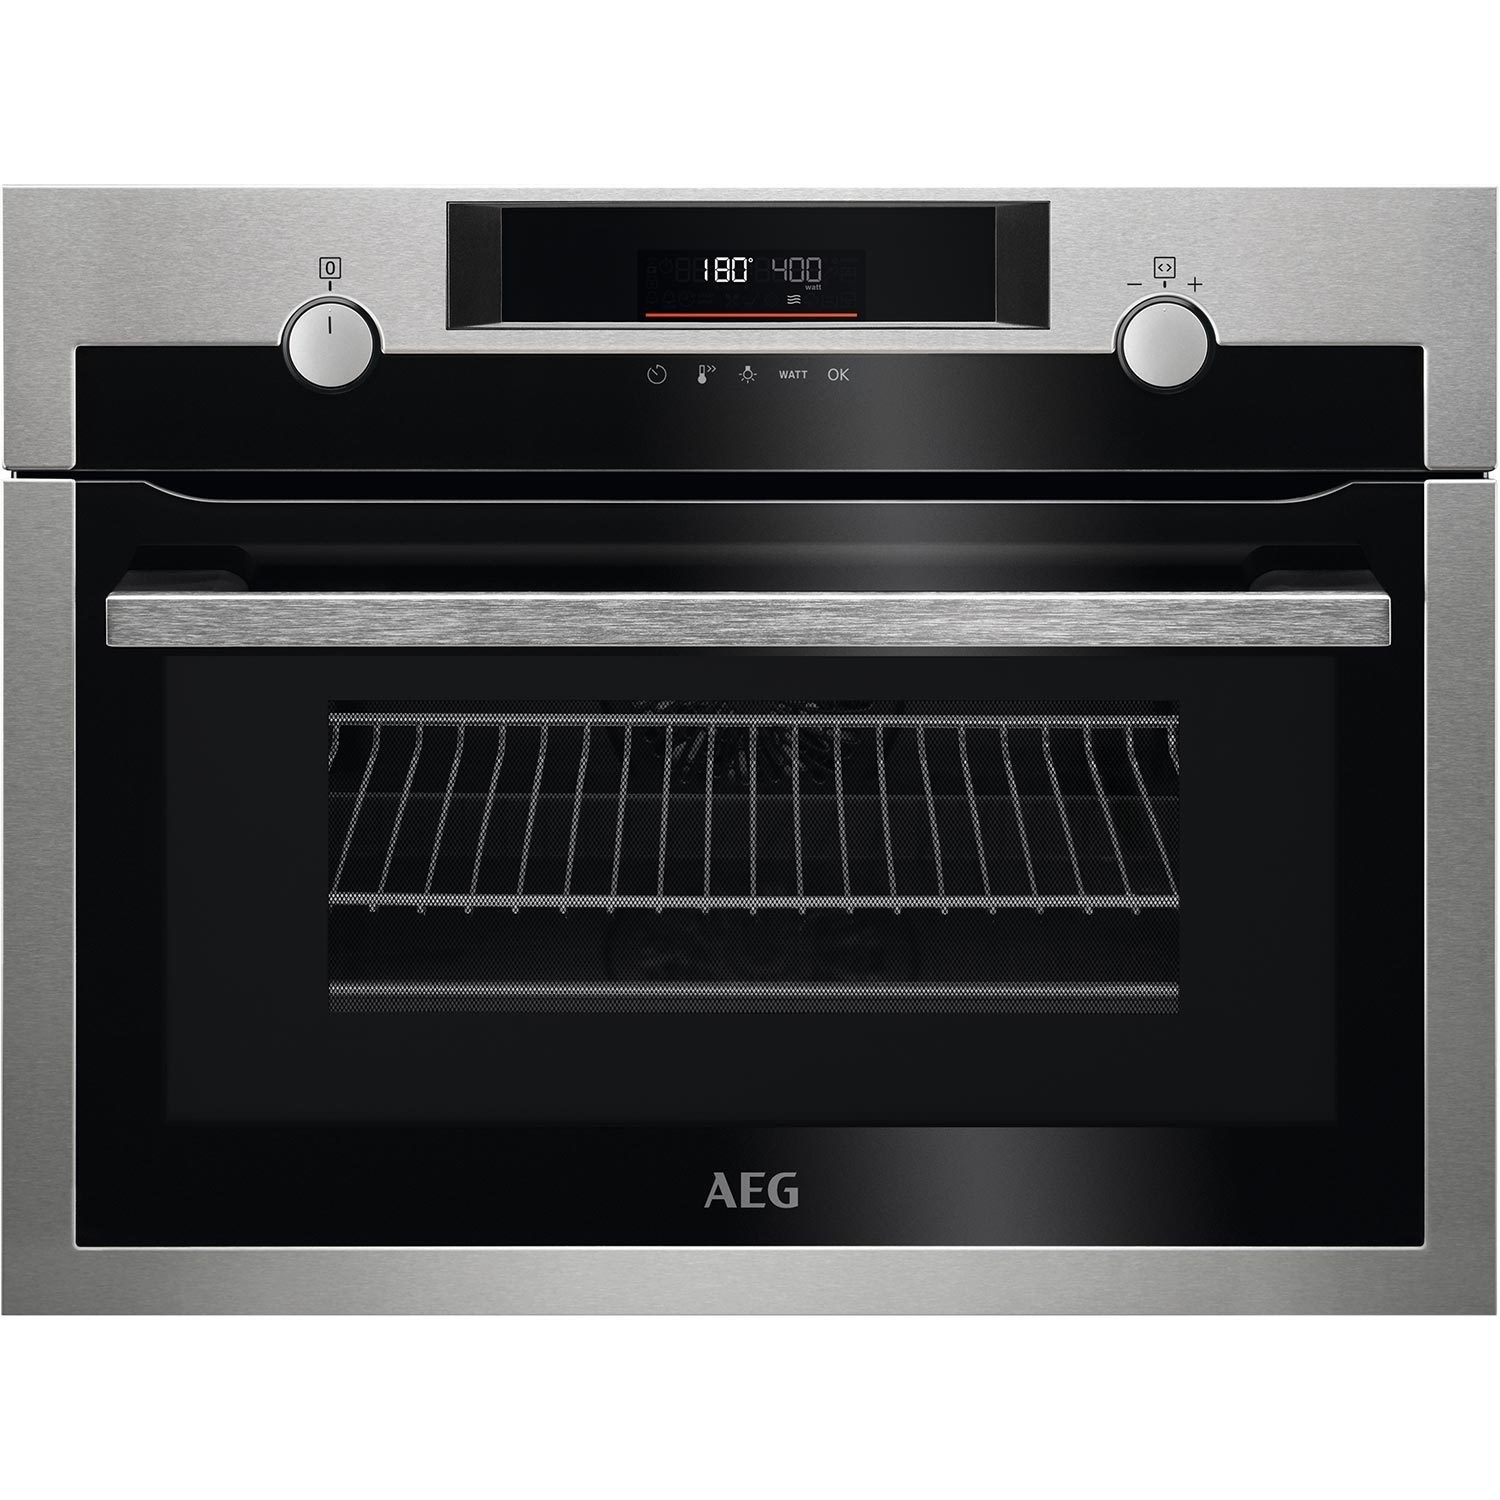 Photos - Other for Computer AEG Built In Combination Microwave Oven with Grill - Stainless Steel KME56 